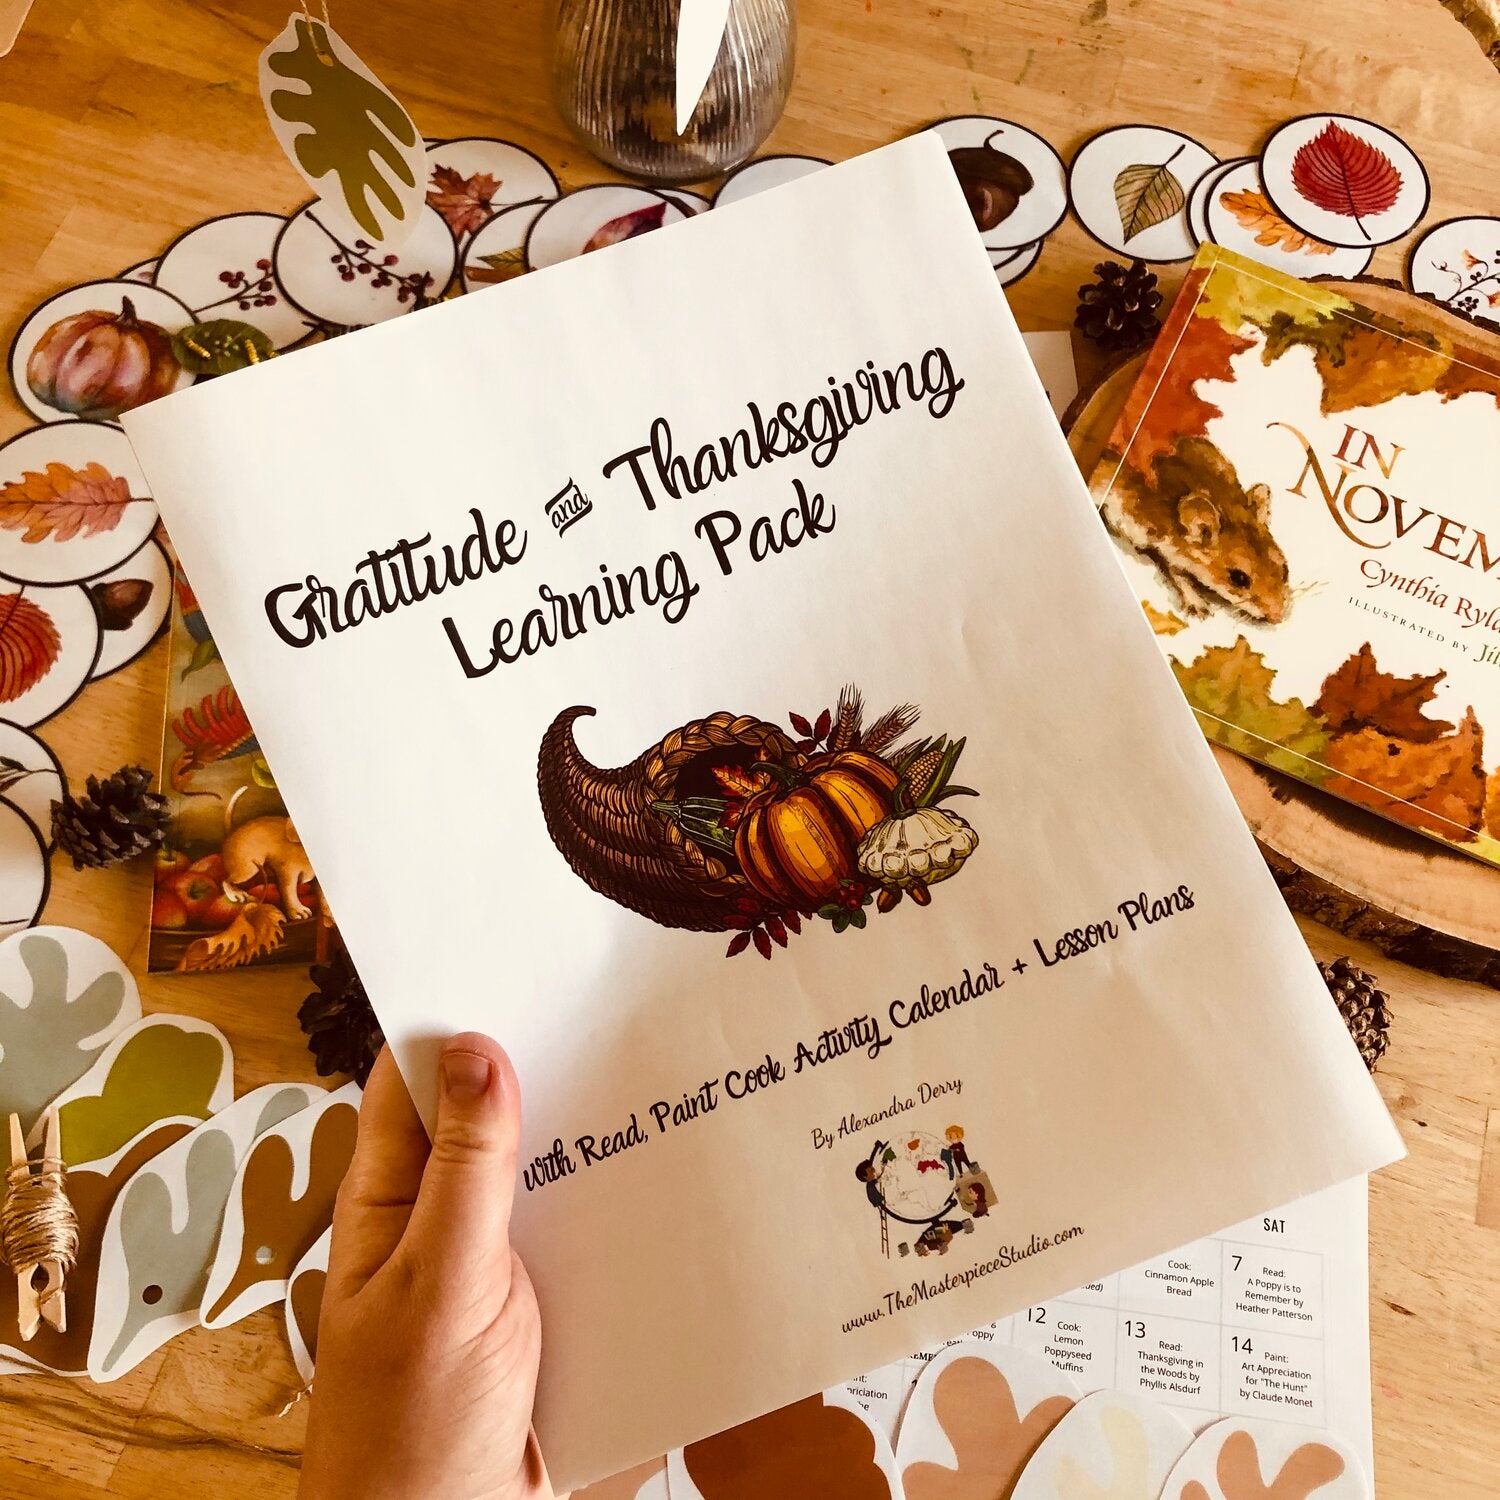 November's Gratitude and Thanksgiving Learning Pack - 3rd Edition